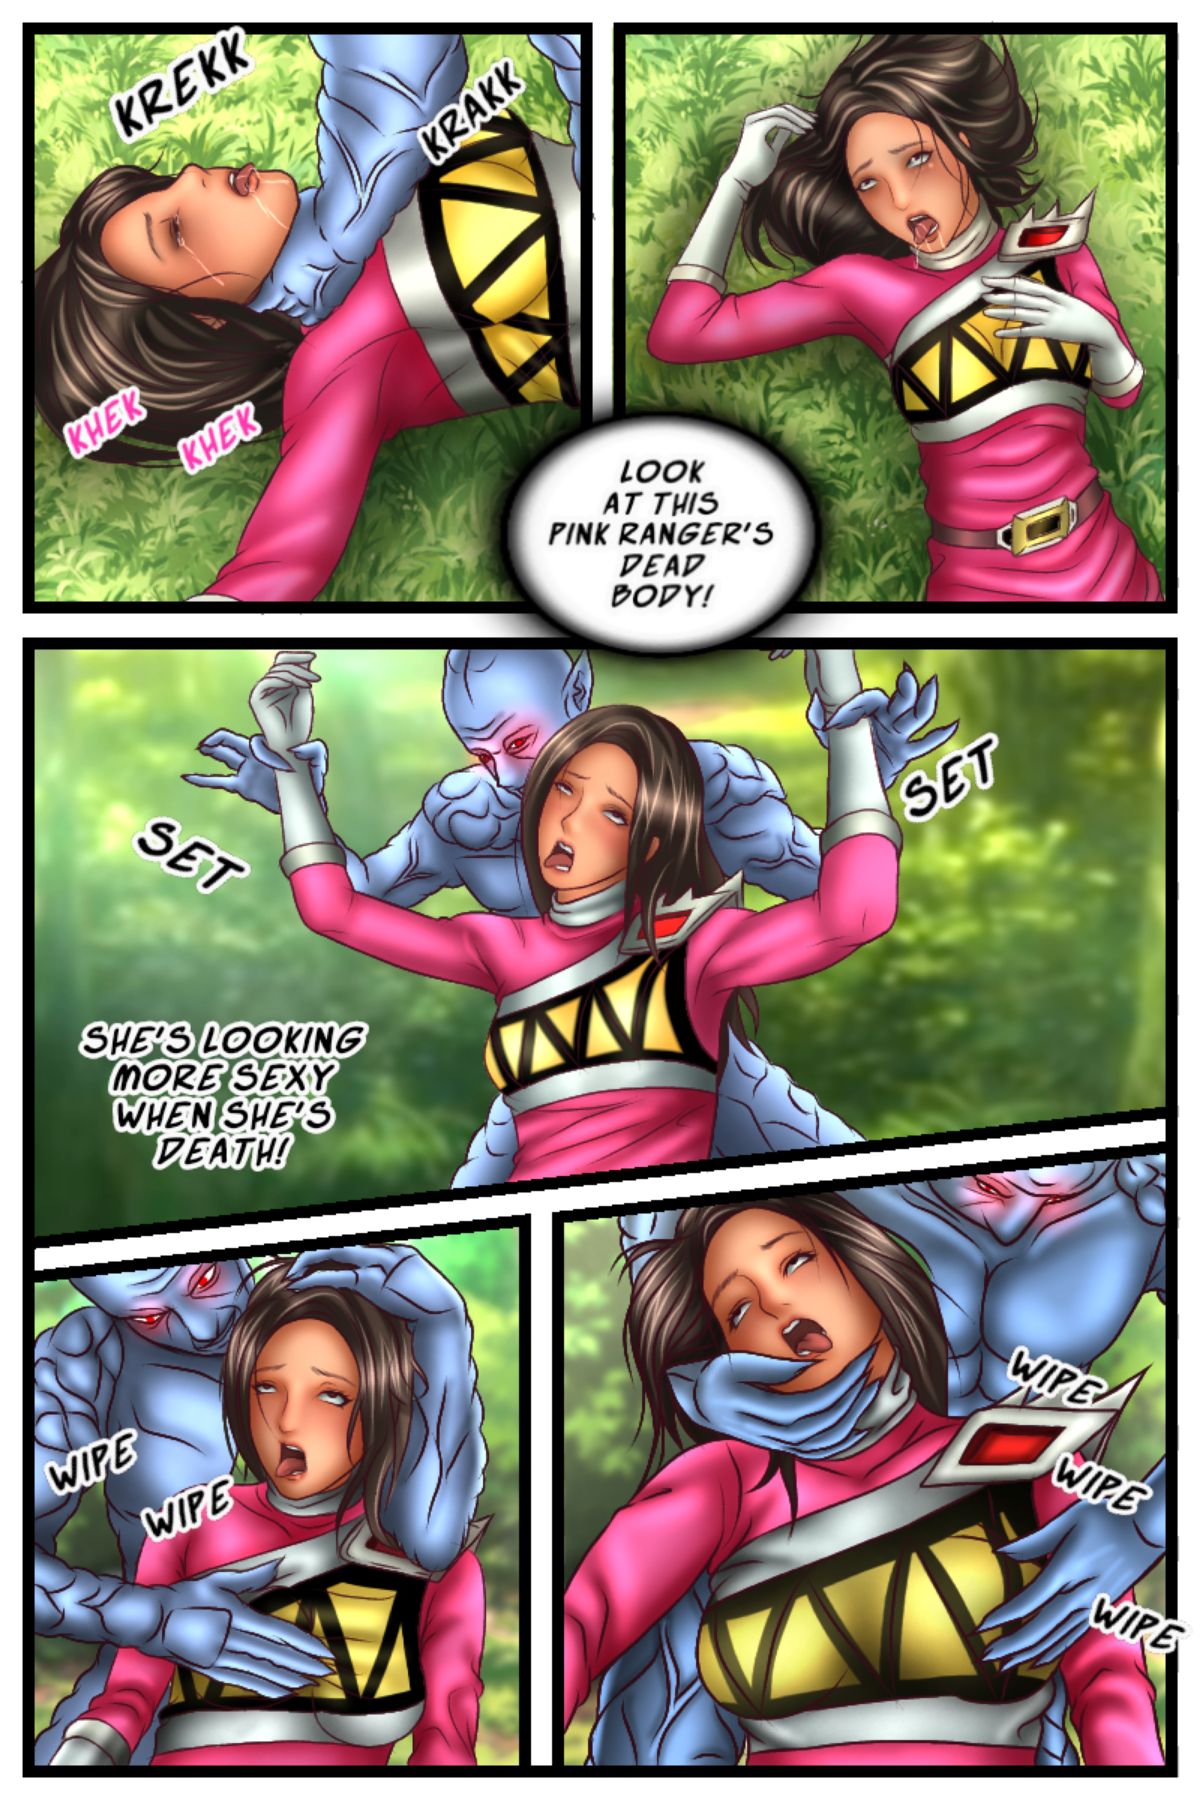 Snuff Porn Comics - Pink Rangers Killed -Snuff Girl Comic- - Page 3 - HentaiEra